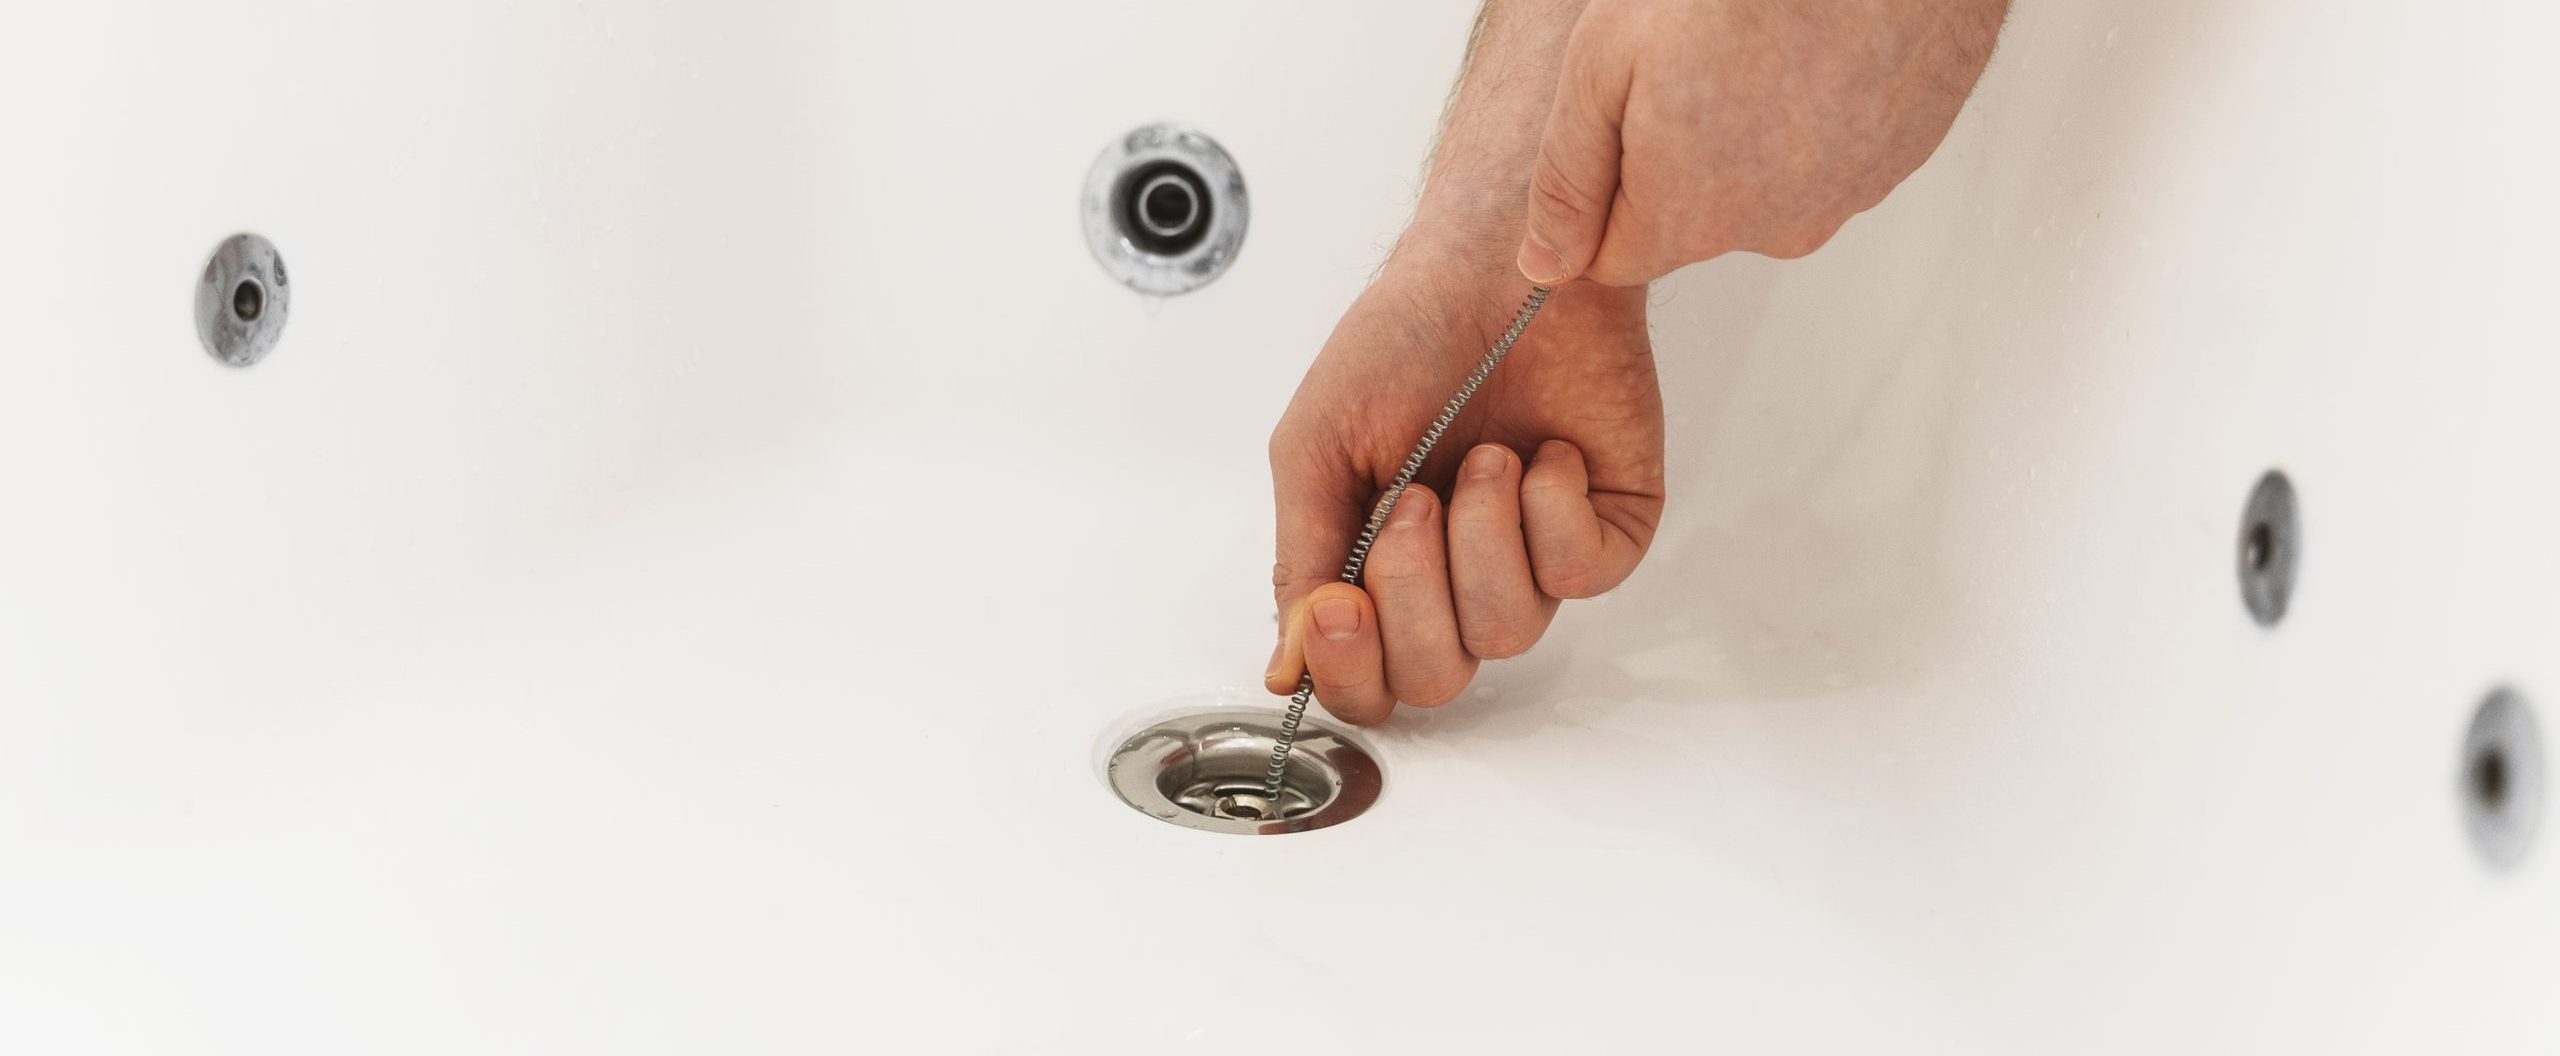 The Best Drain Clog Remover  Reviews, Ratings, Comparisons